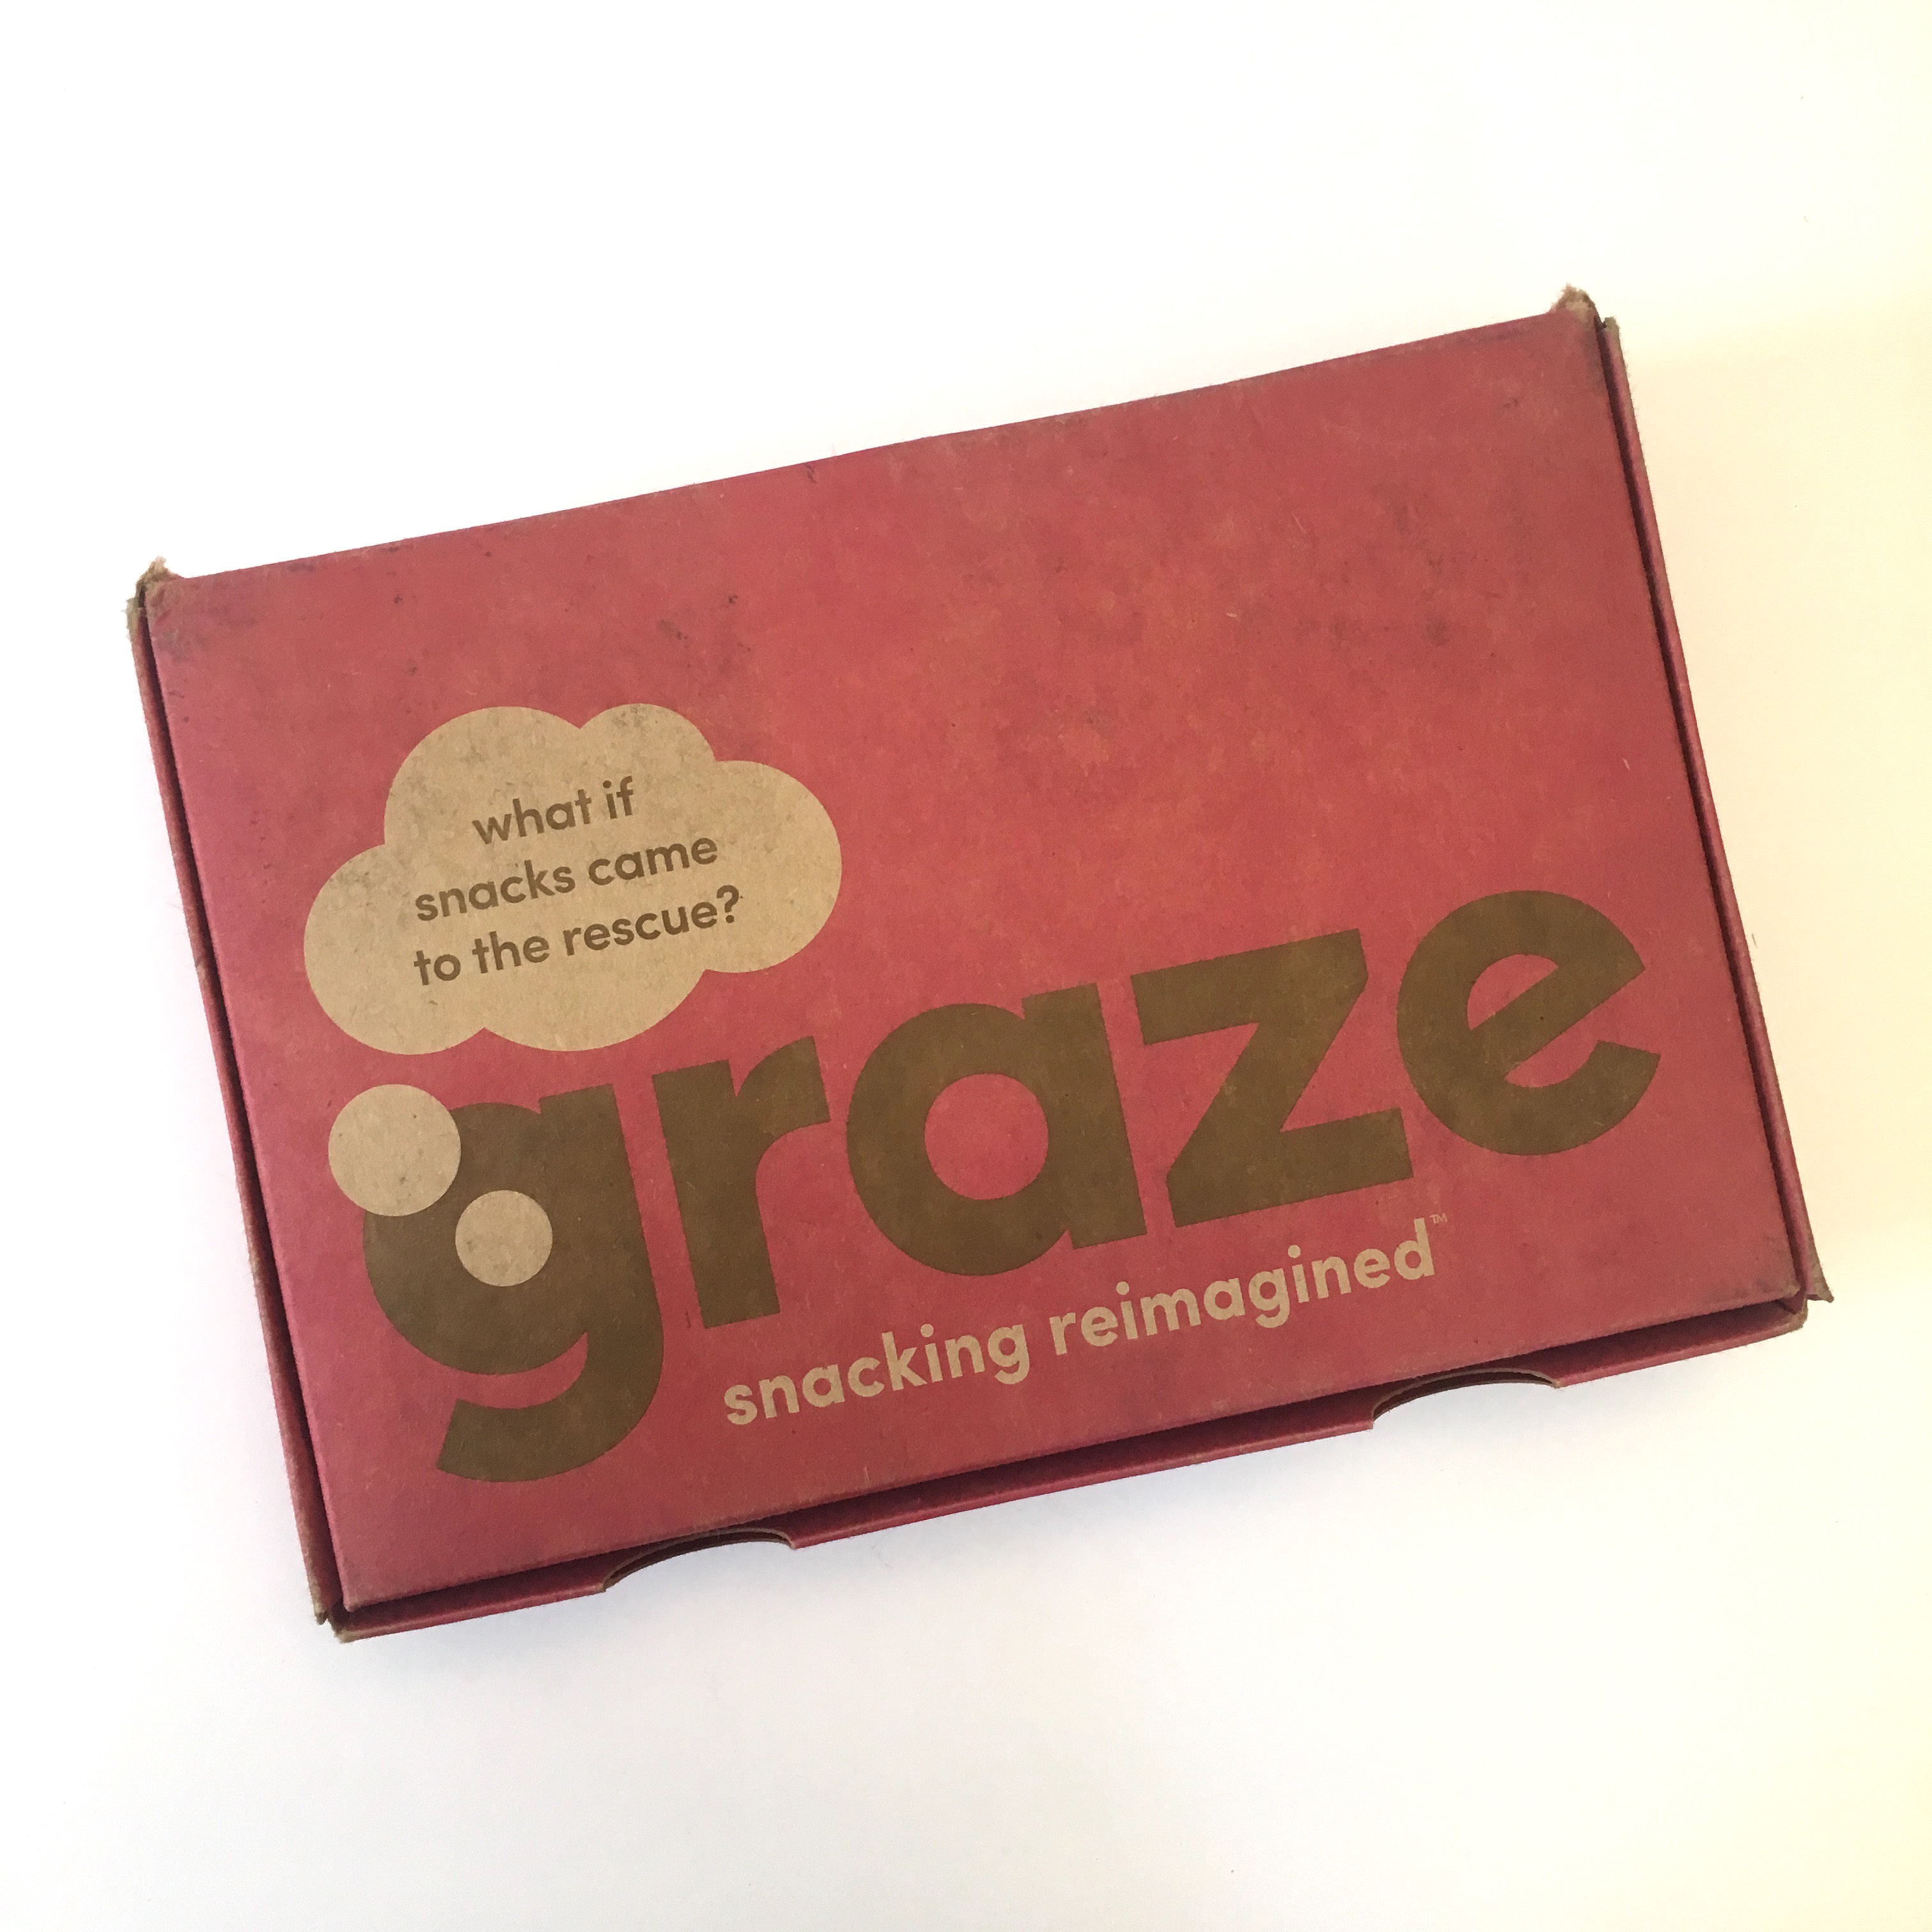 Graze 8 Snack Variety Box Review + Free Box Coupon – July 2018